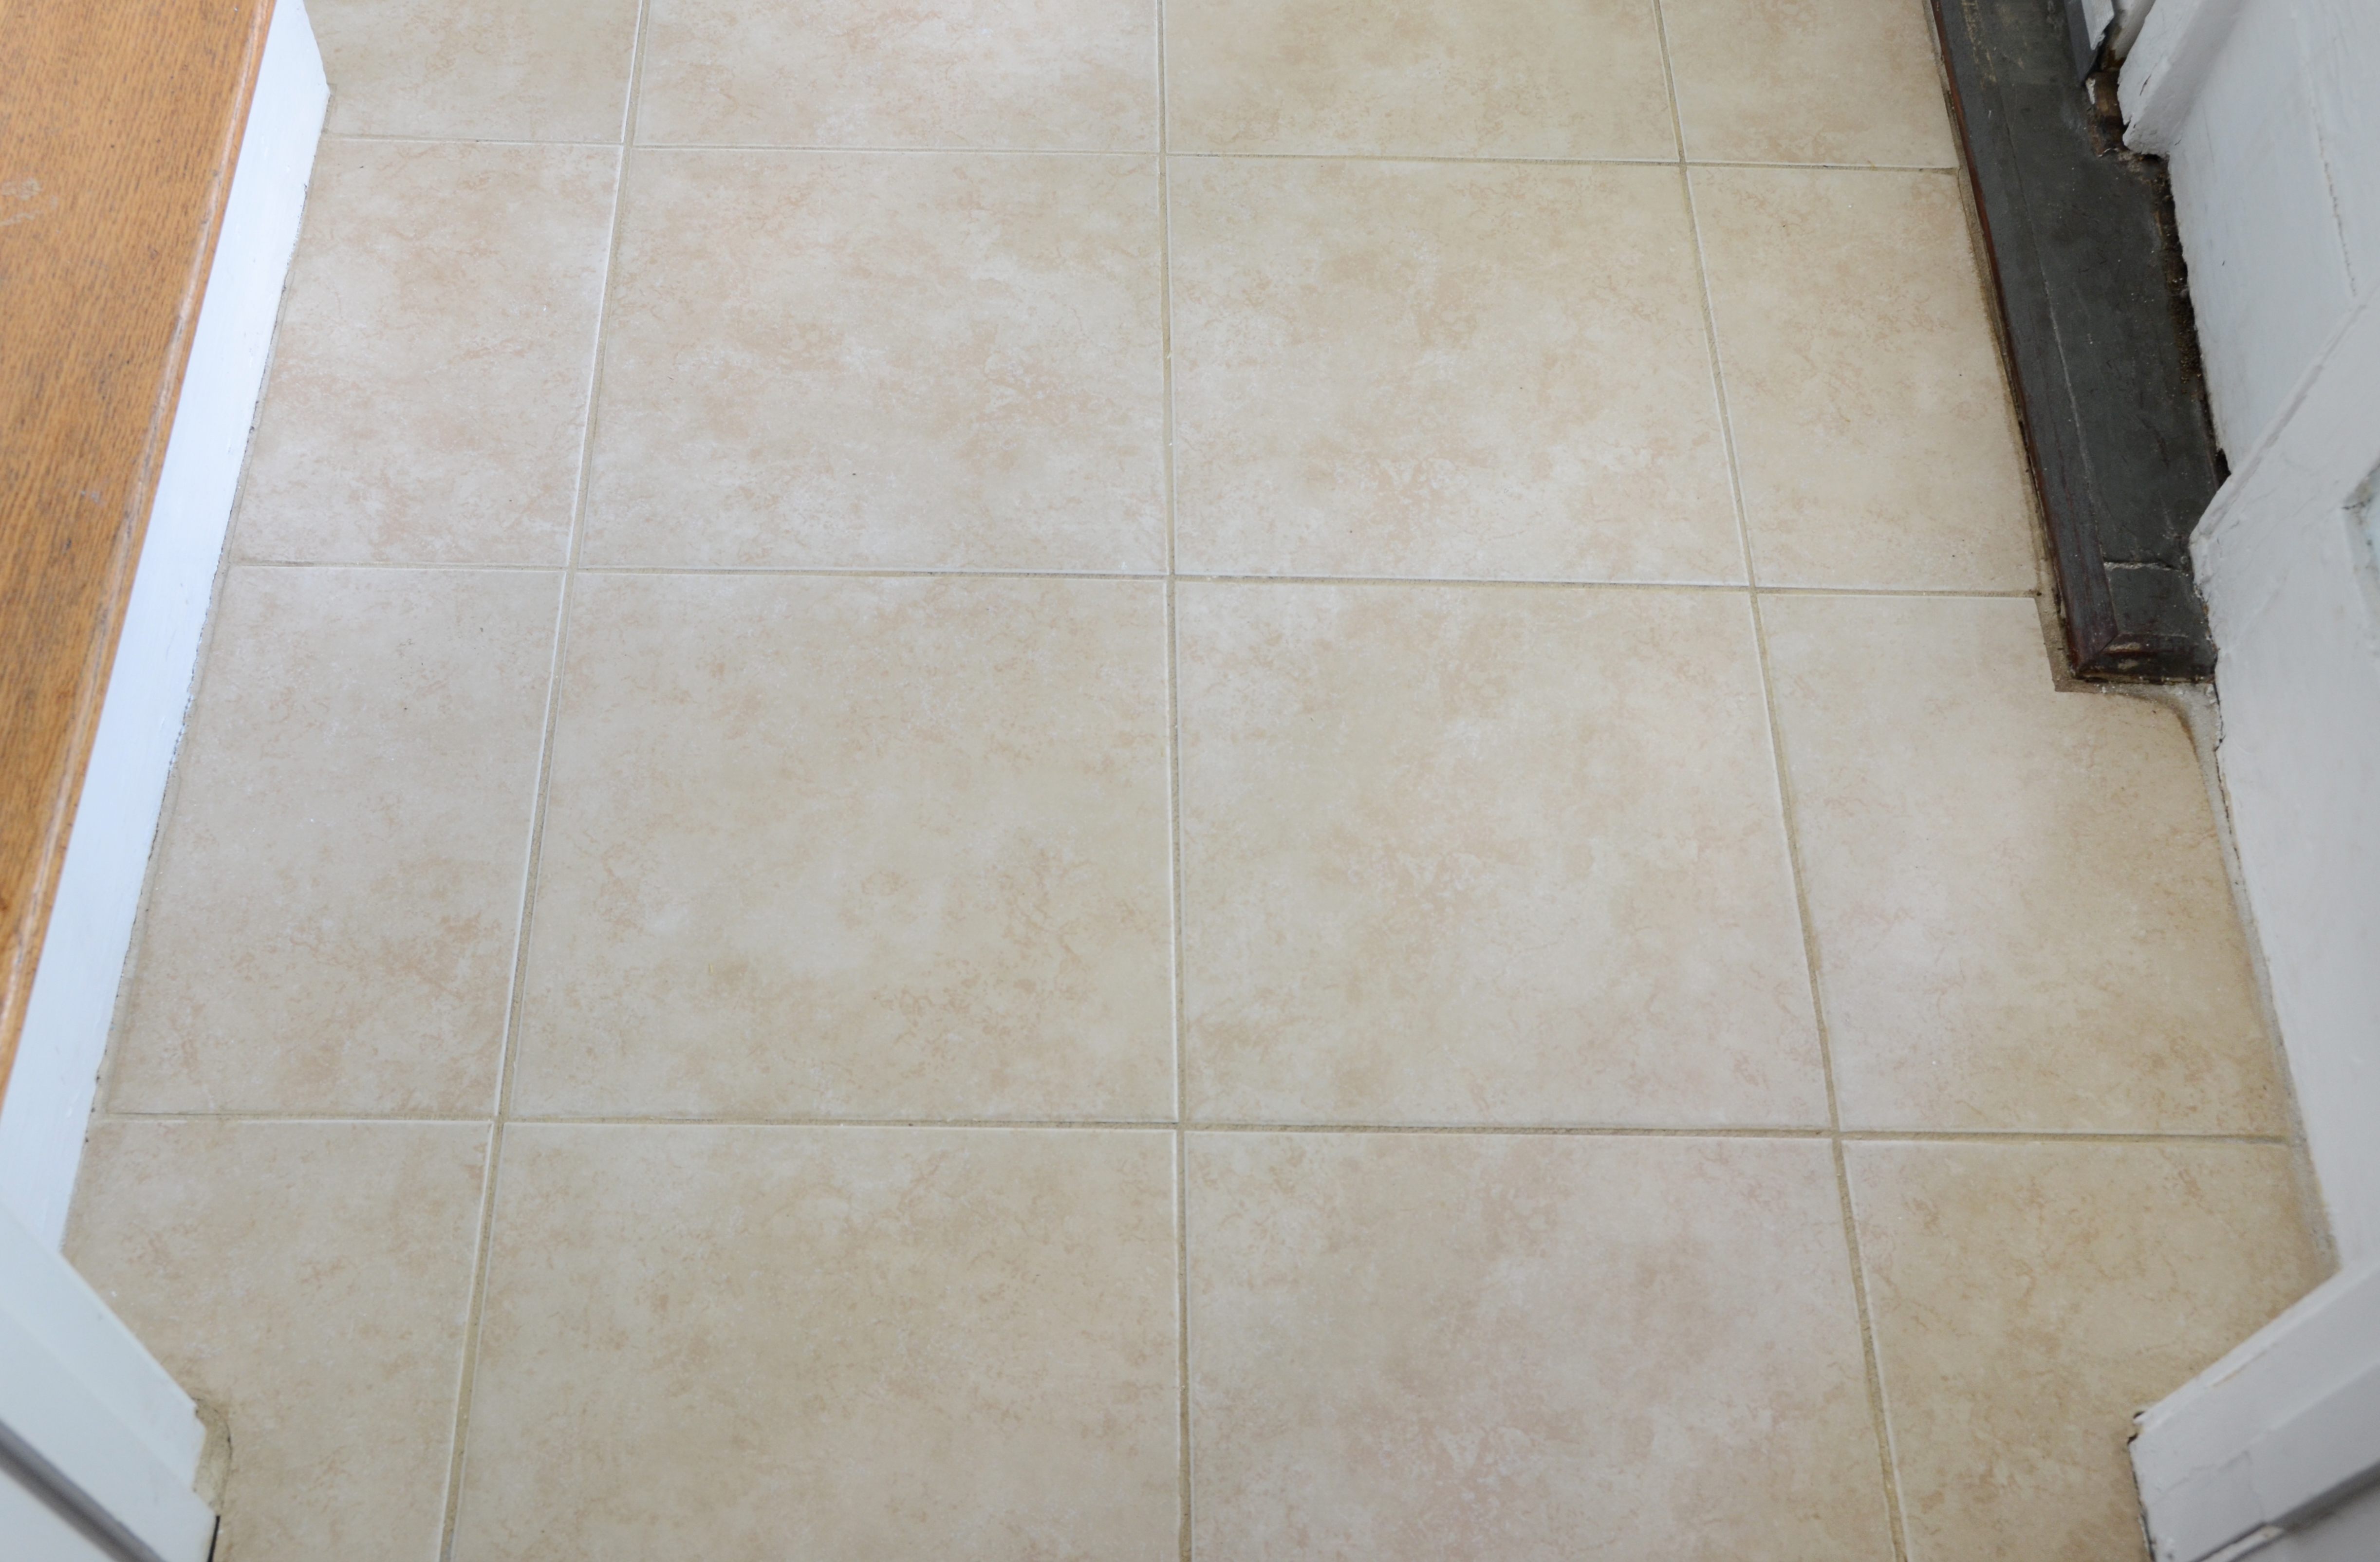 Diy grout cleaner 6